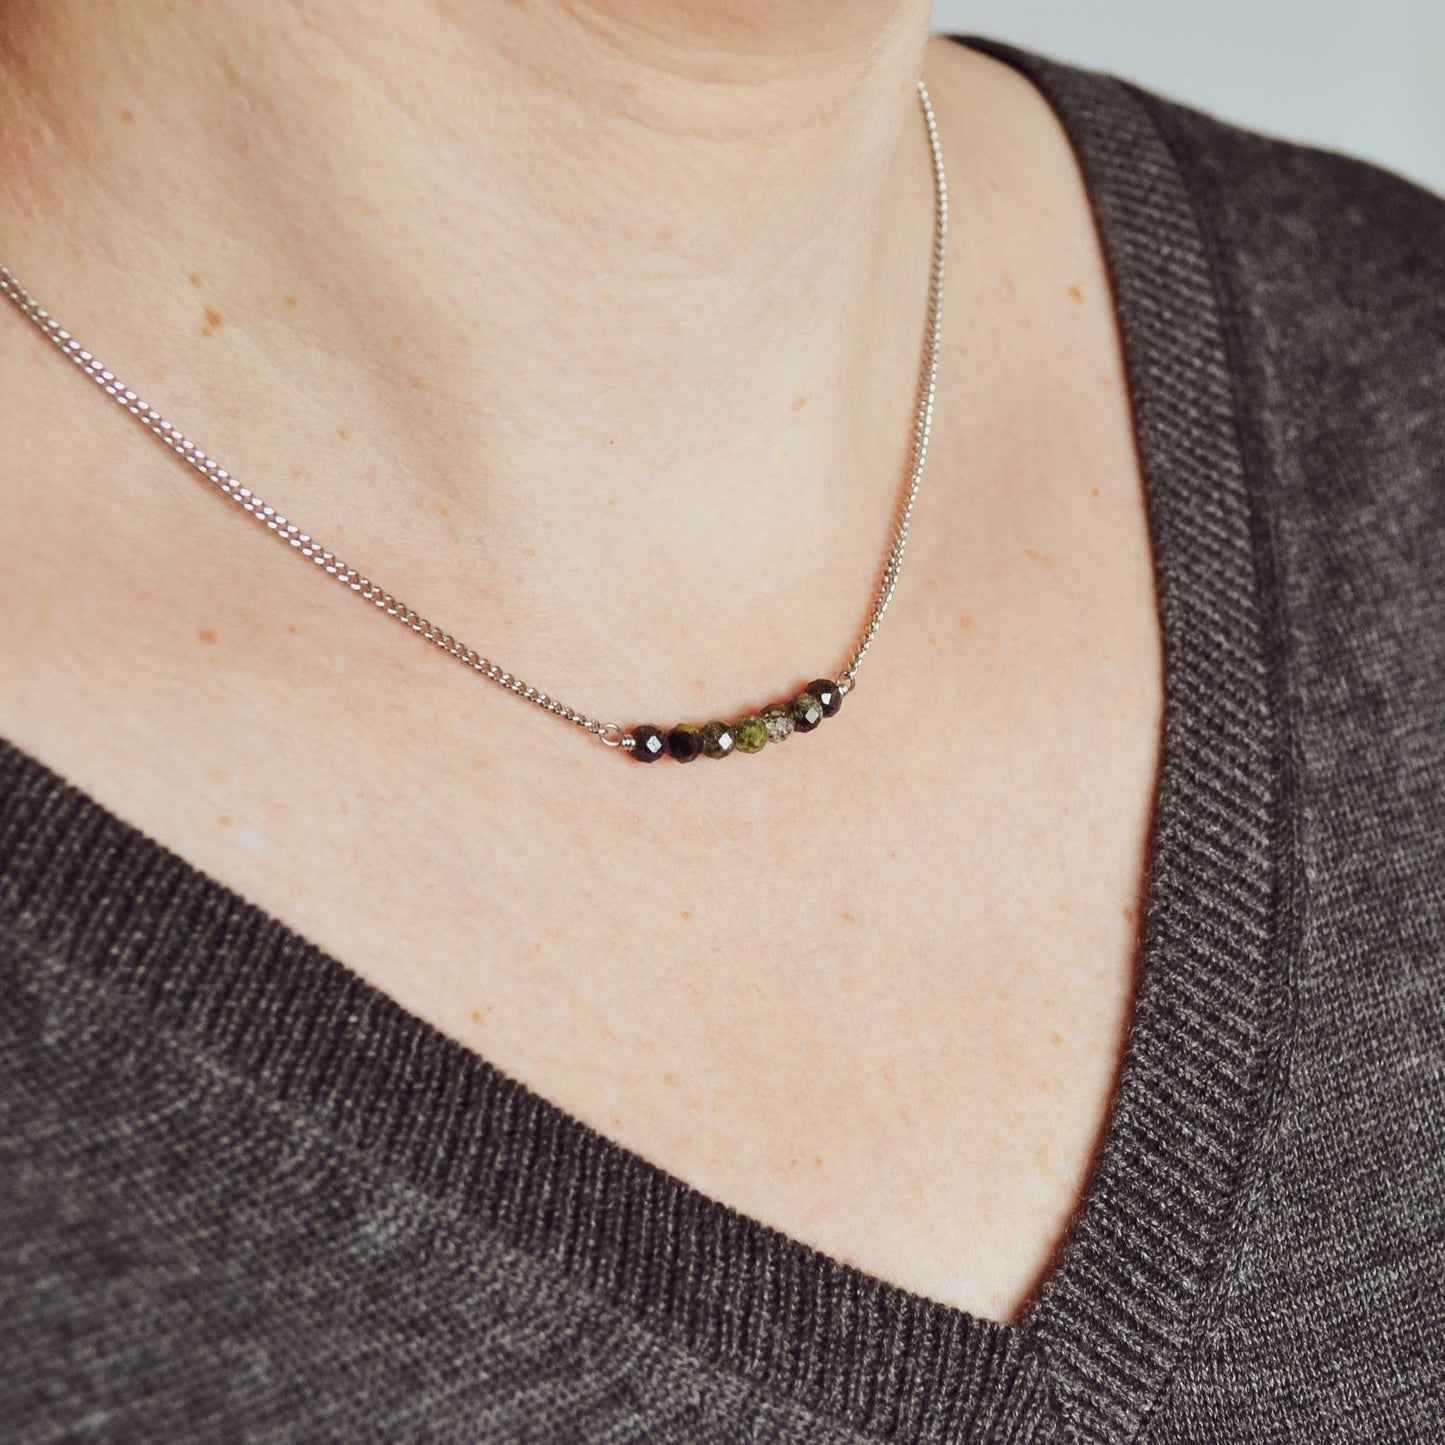 Woman wearing grey v neck jumper and dainty dark green stone necklace